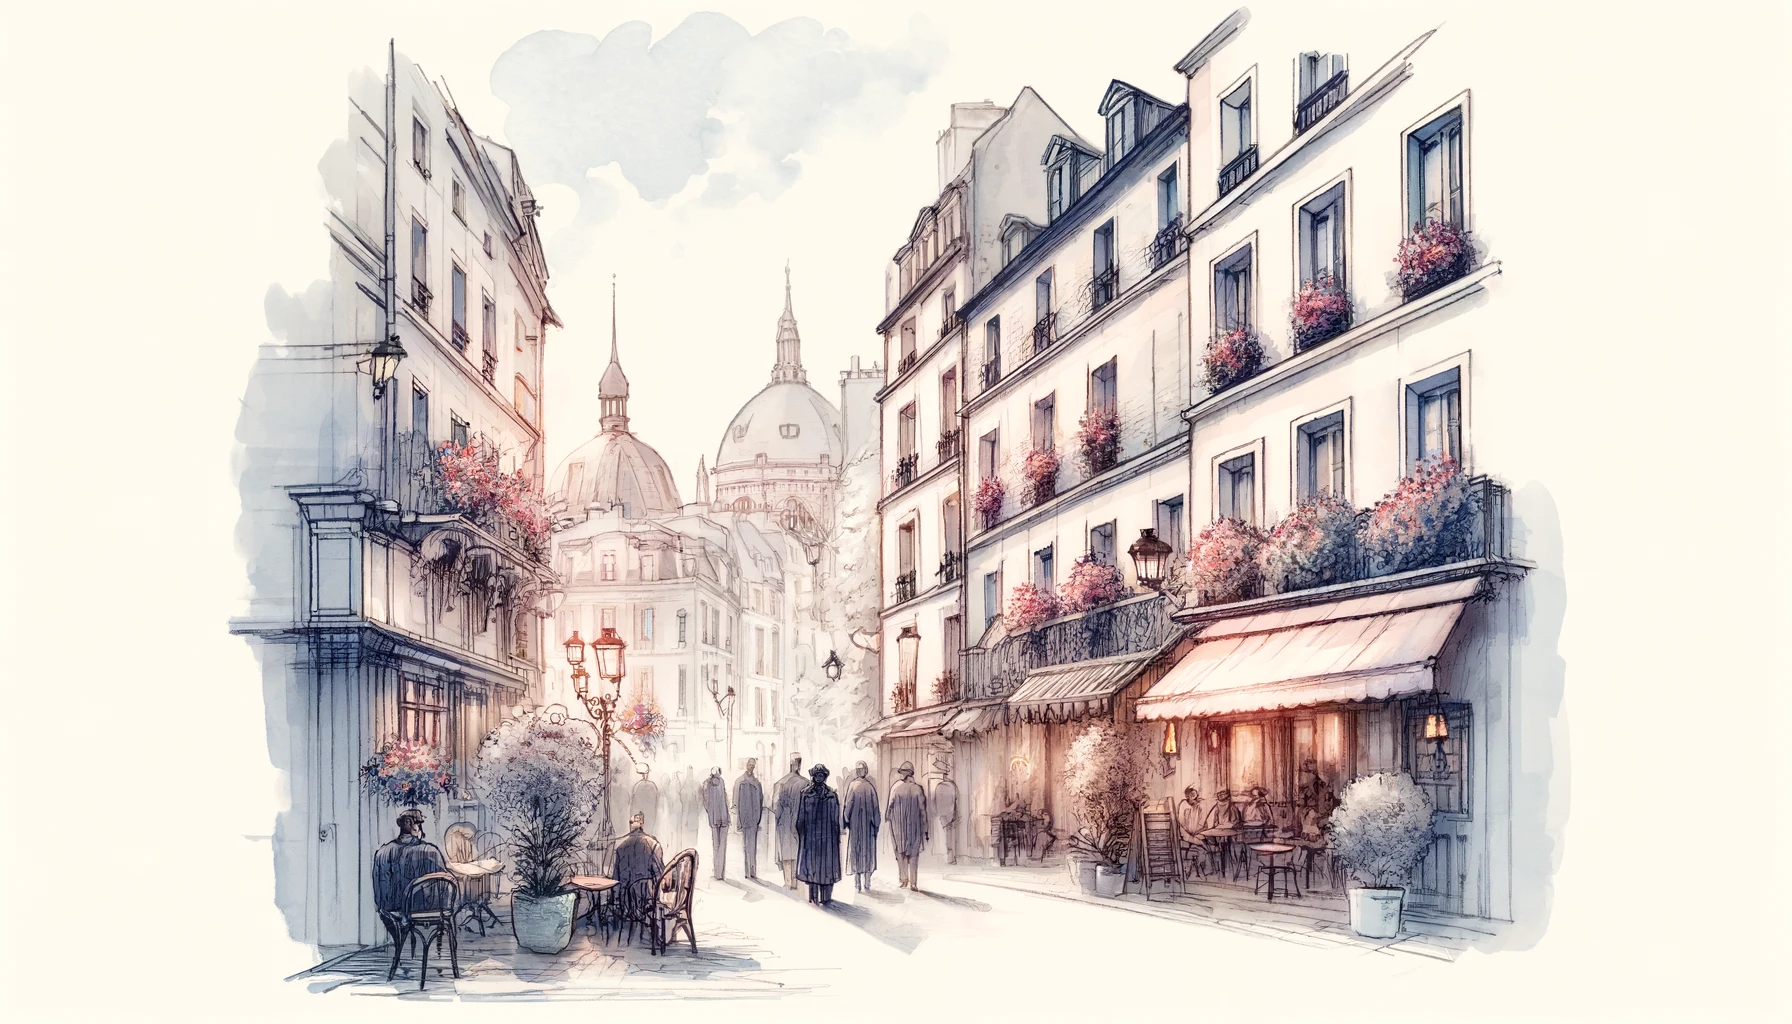 Charming French street scene with pedestrians and outdoor café dining, captured in a watercolor sketch for 'Eat Like a Local in France' article.